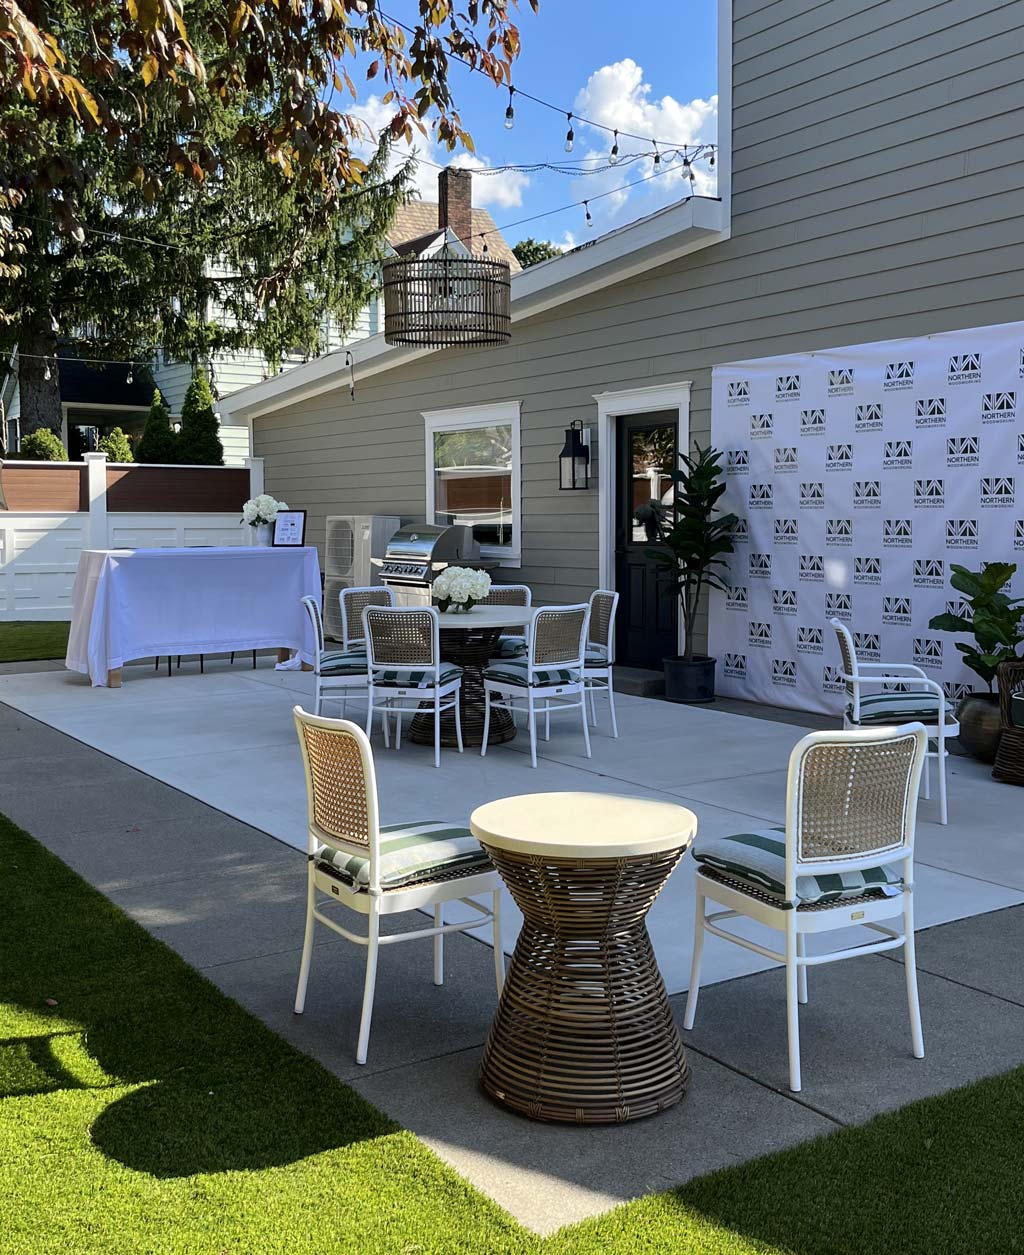 Northern woodworking event and a decorated outdoor space